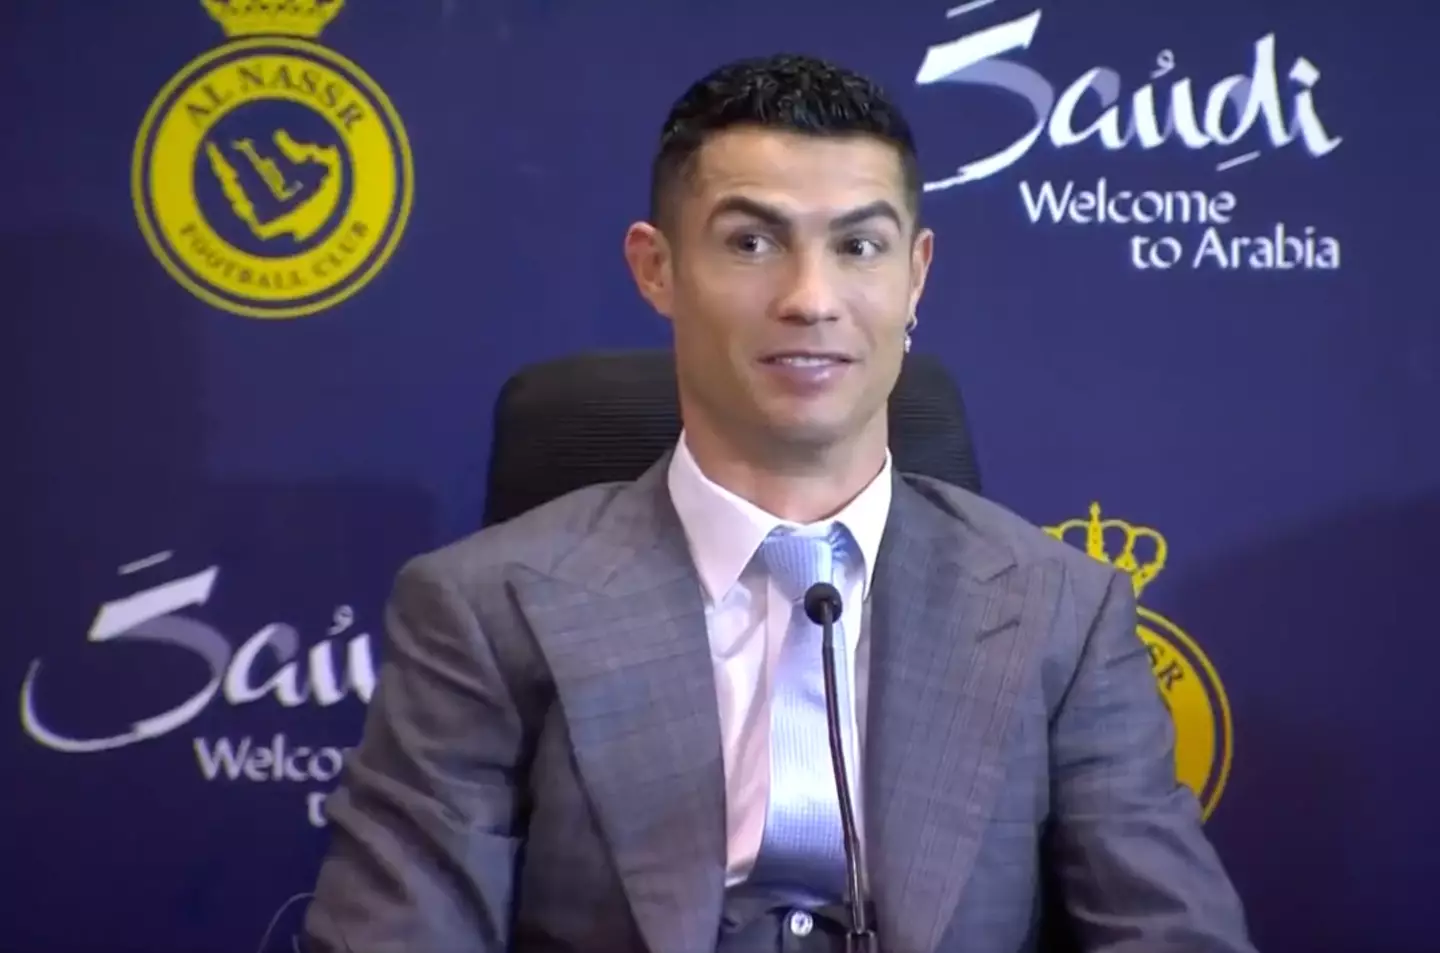 Ronaldo's initial reaction earlier in the press conference. (Image